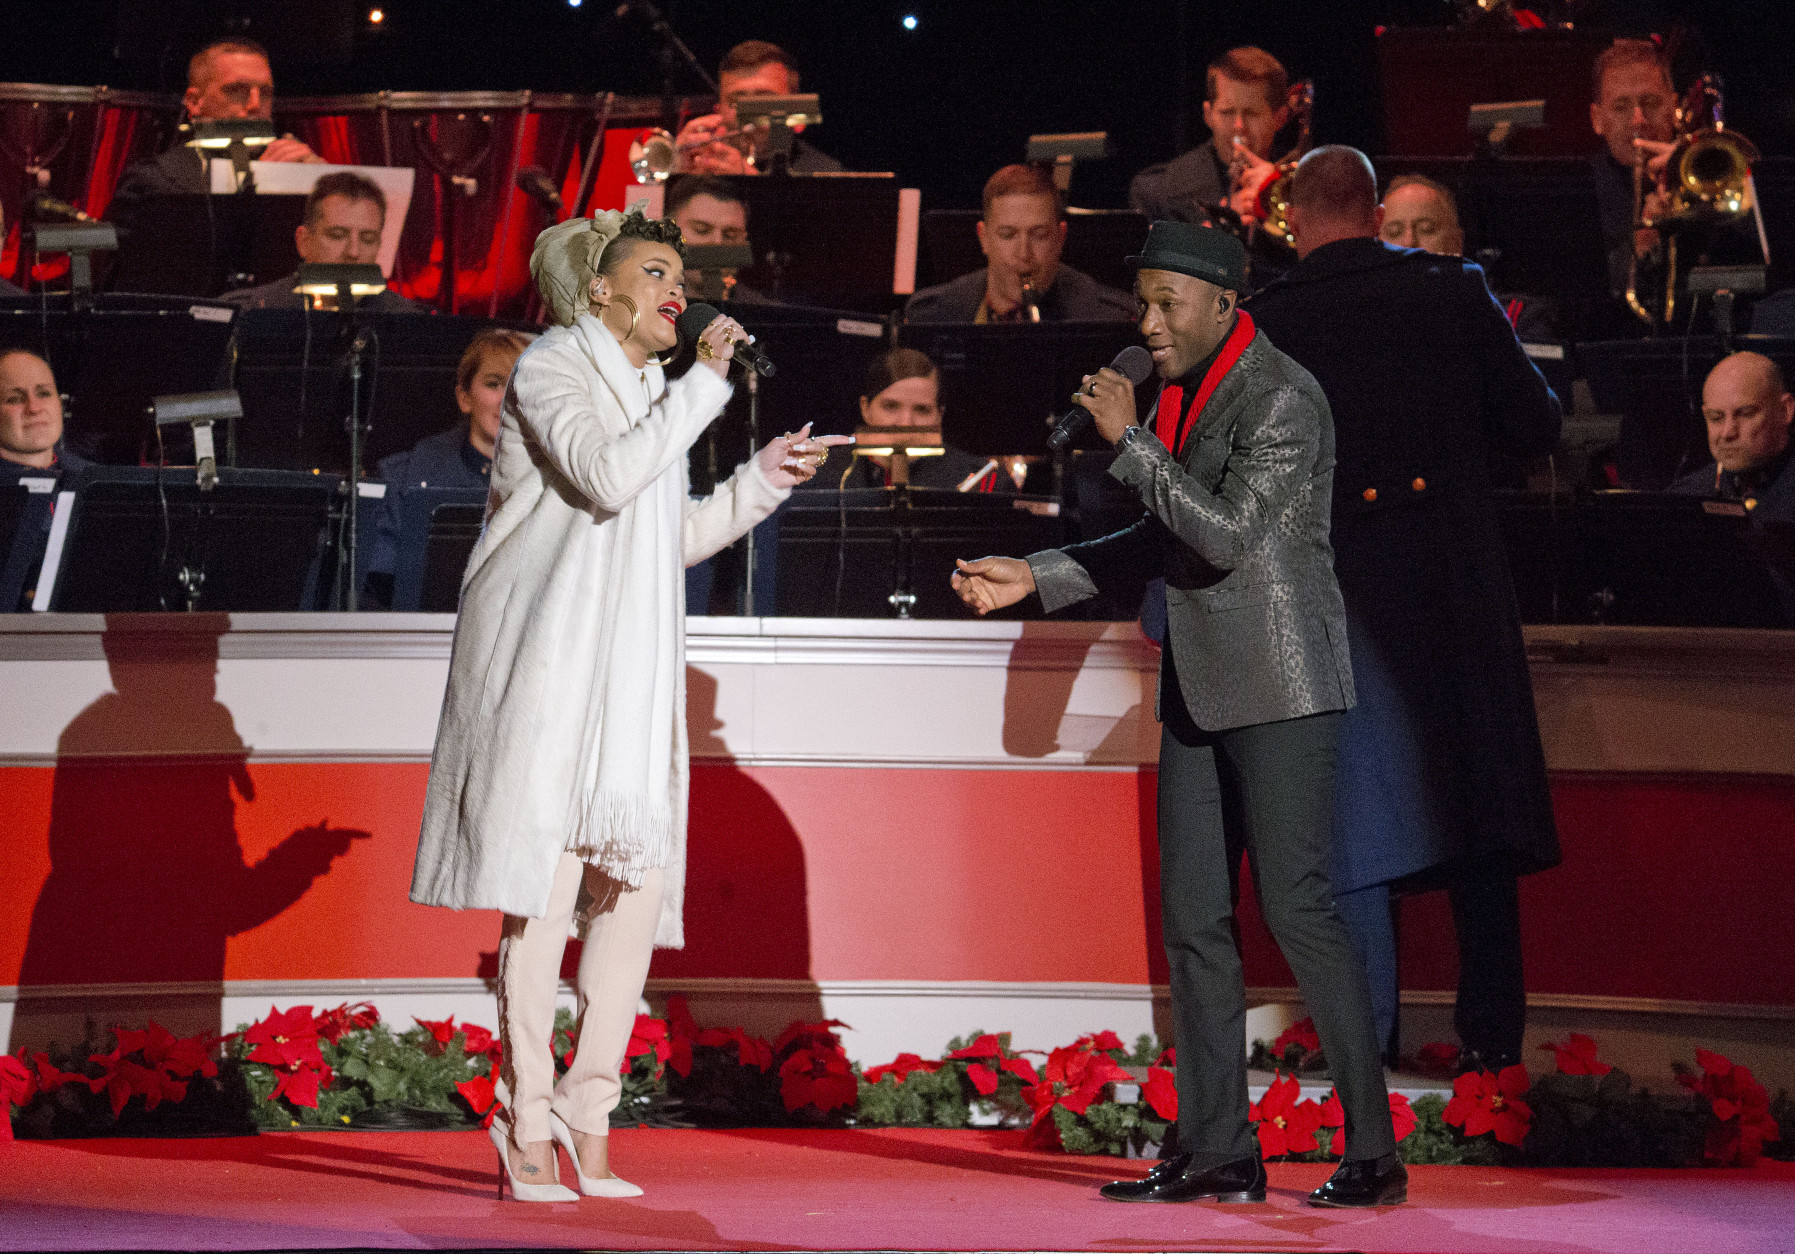 Singers Andra Day, left, and Aloe Blacc, right, perform onstage during the National Christmas Tree Lighting ceremony at the Ellipse in Washington, Thursday, Dec. 3, 2015. (AP Photo/Pablo Martinez Monsivais)